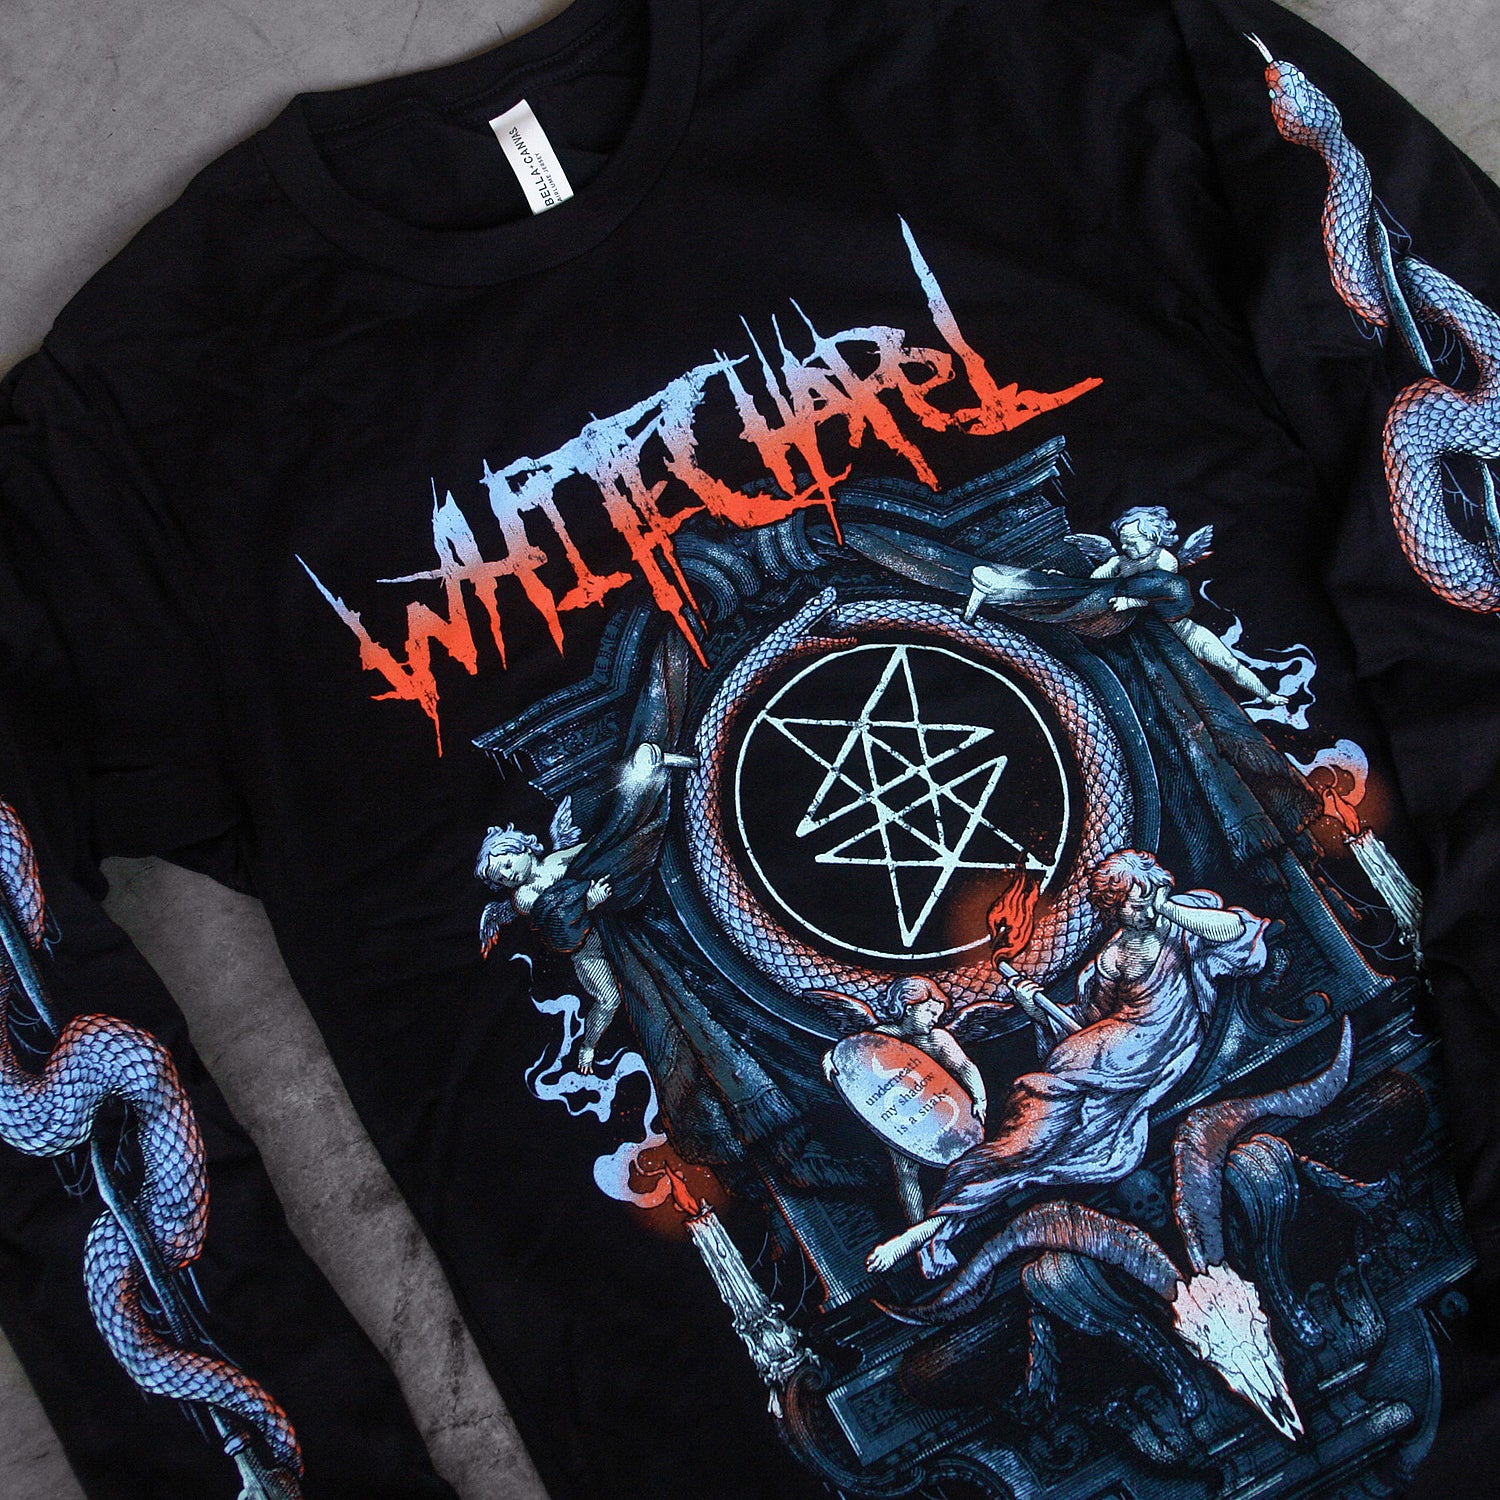 close up image of a black long sleeve tee shirt laid on a concrete. tee has full body print of an altar with an angel laying across, above a serpent head. at the top says whitechapel. each sleeve has a print of a serpentine wrapped around an arrow